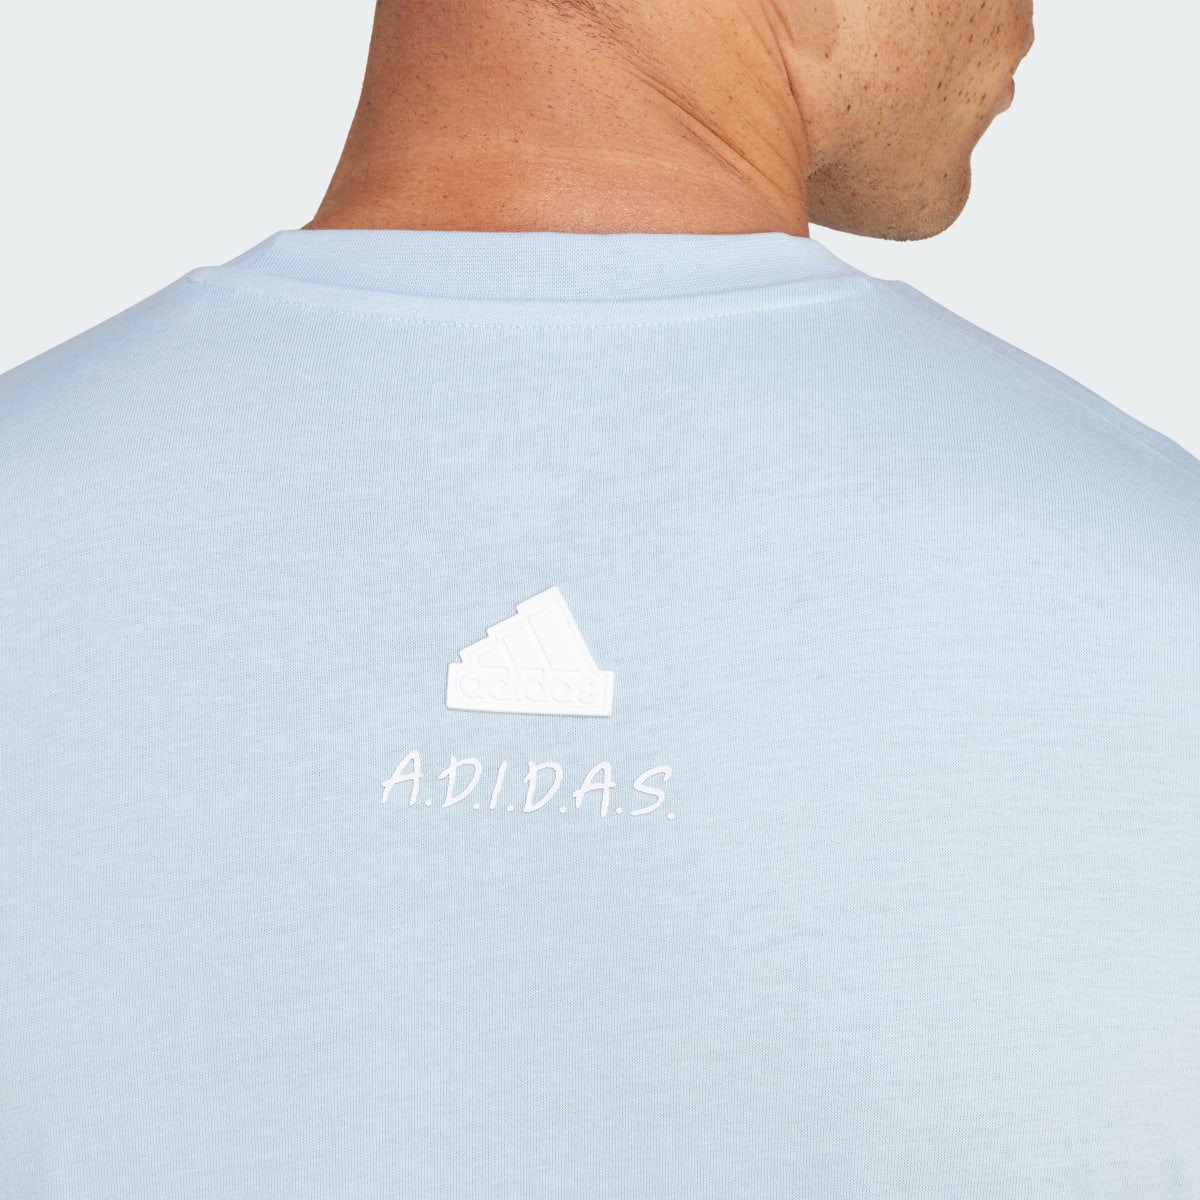 Adidas T-shirt All Day I Dream About…. 7